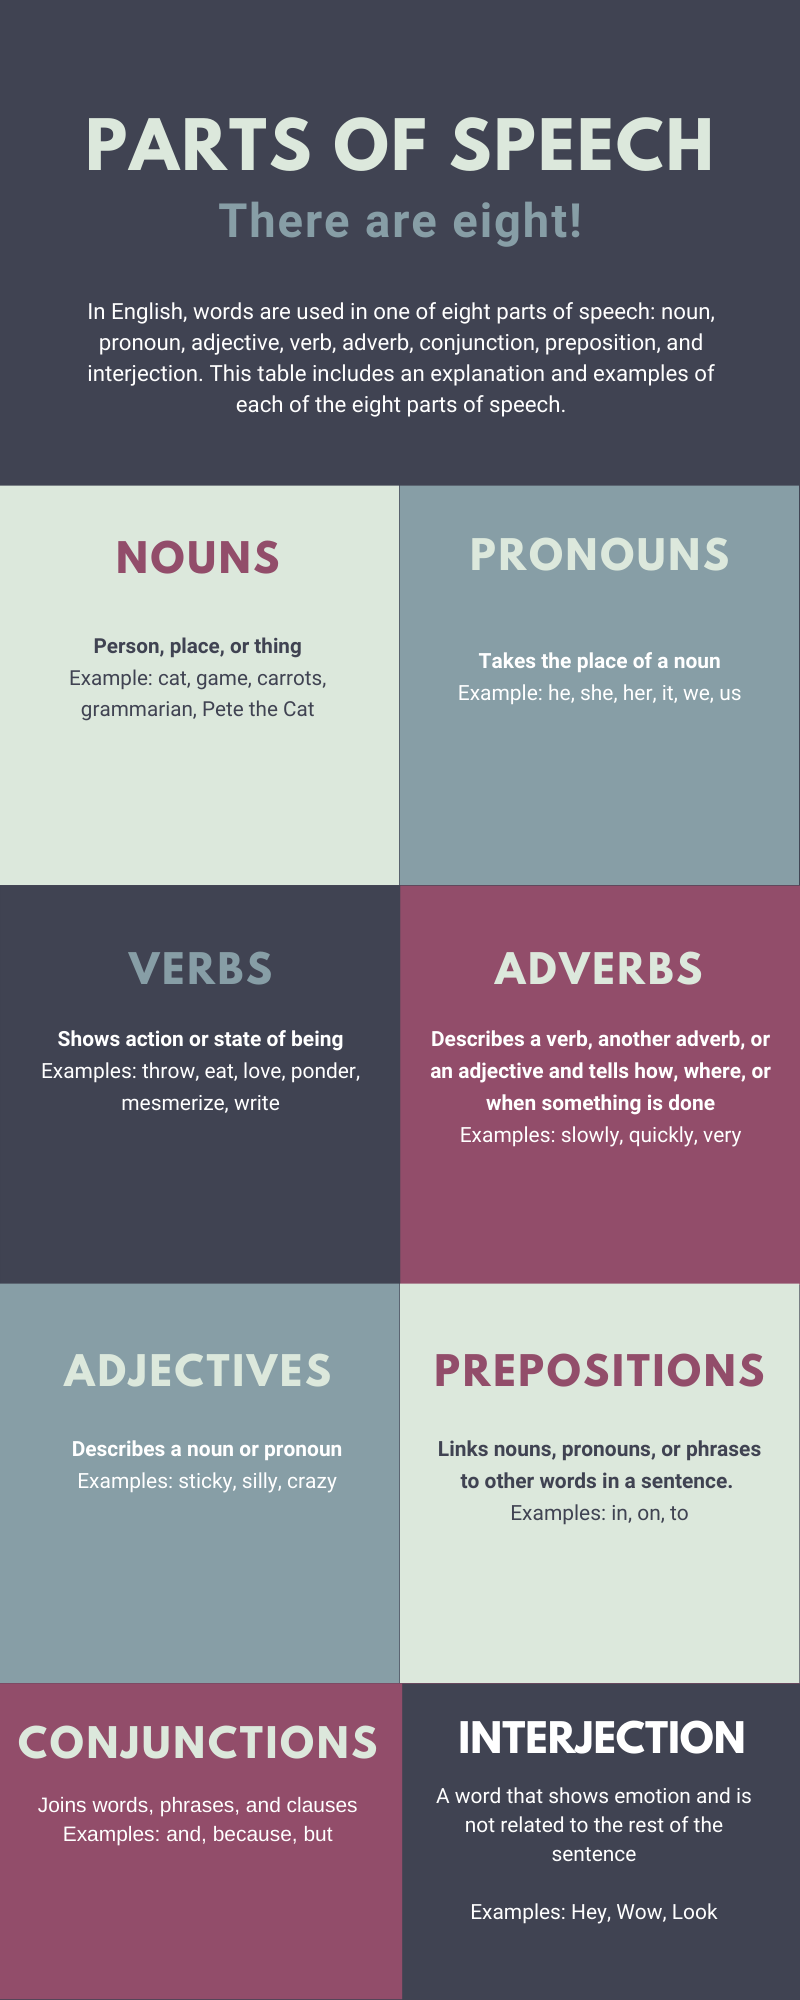 Infographic, Parts of Speech, eight parts of speech, Nouns, Pronouns, Verbs,Adverbs, Adjectives, Prepositions, Conjunctions, Interjections